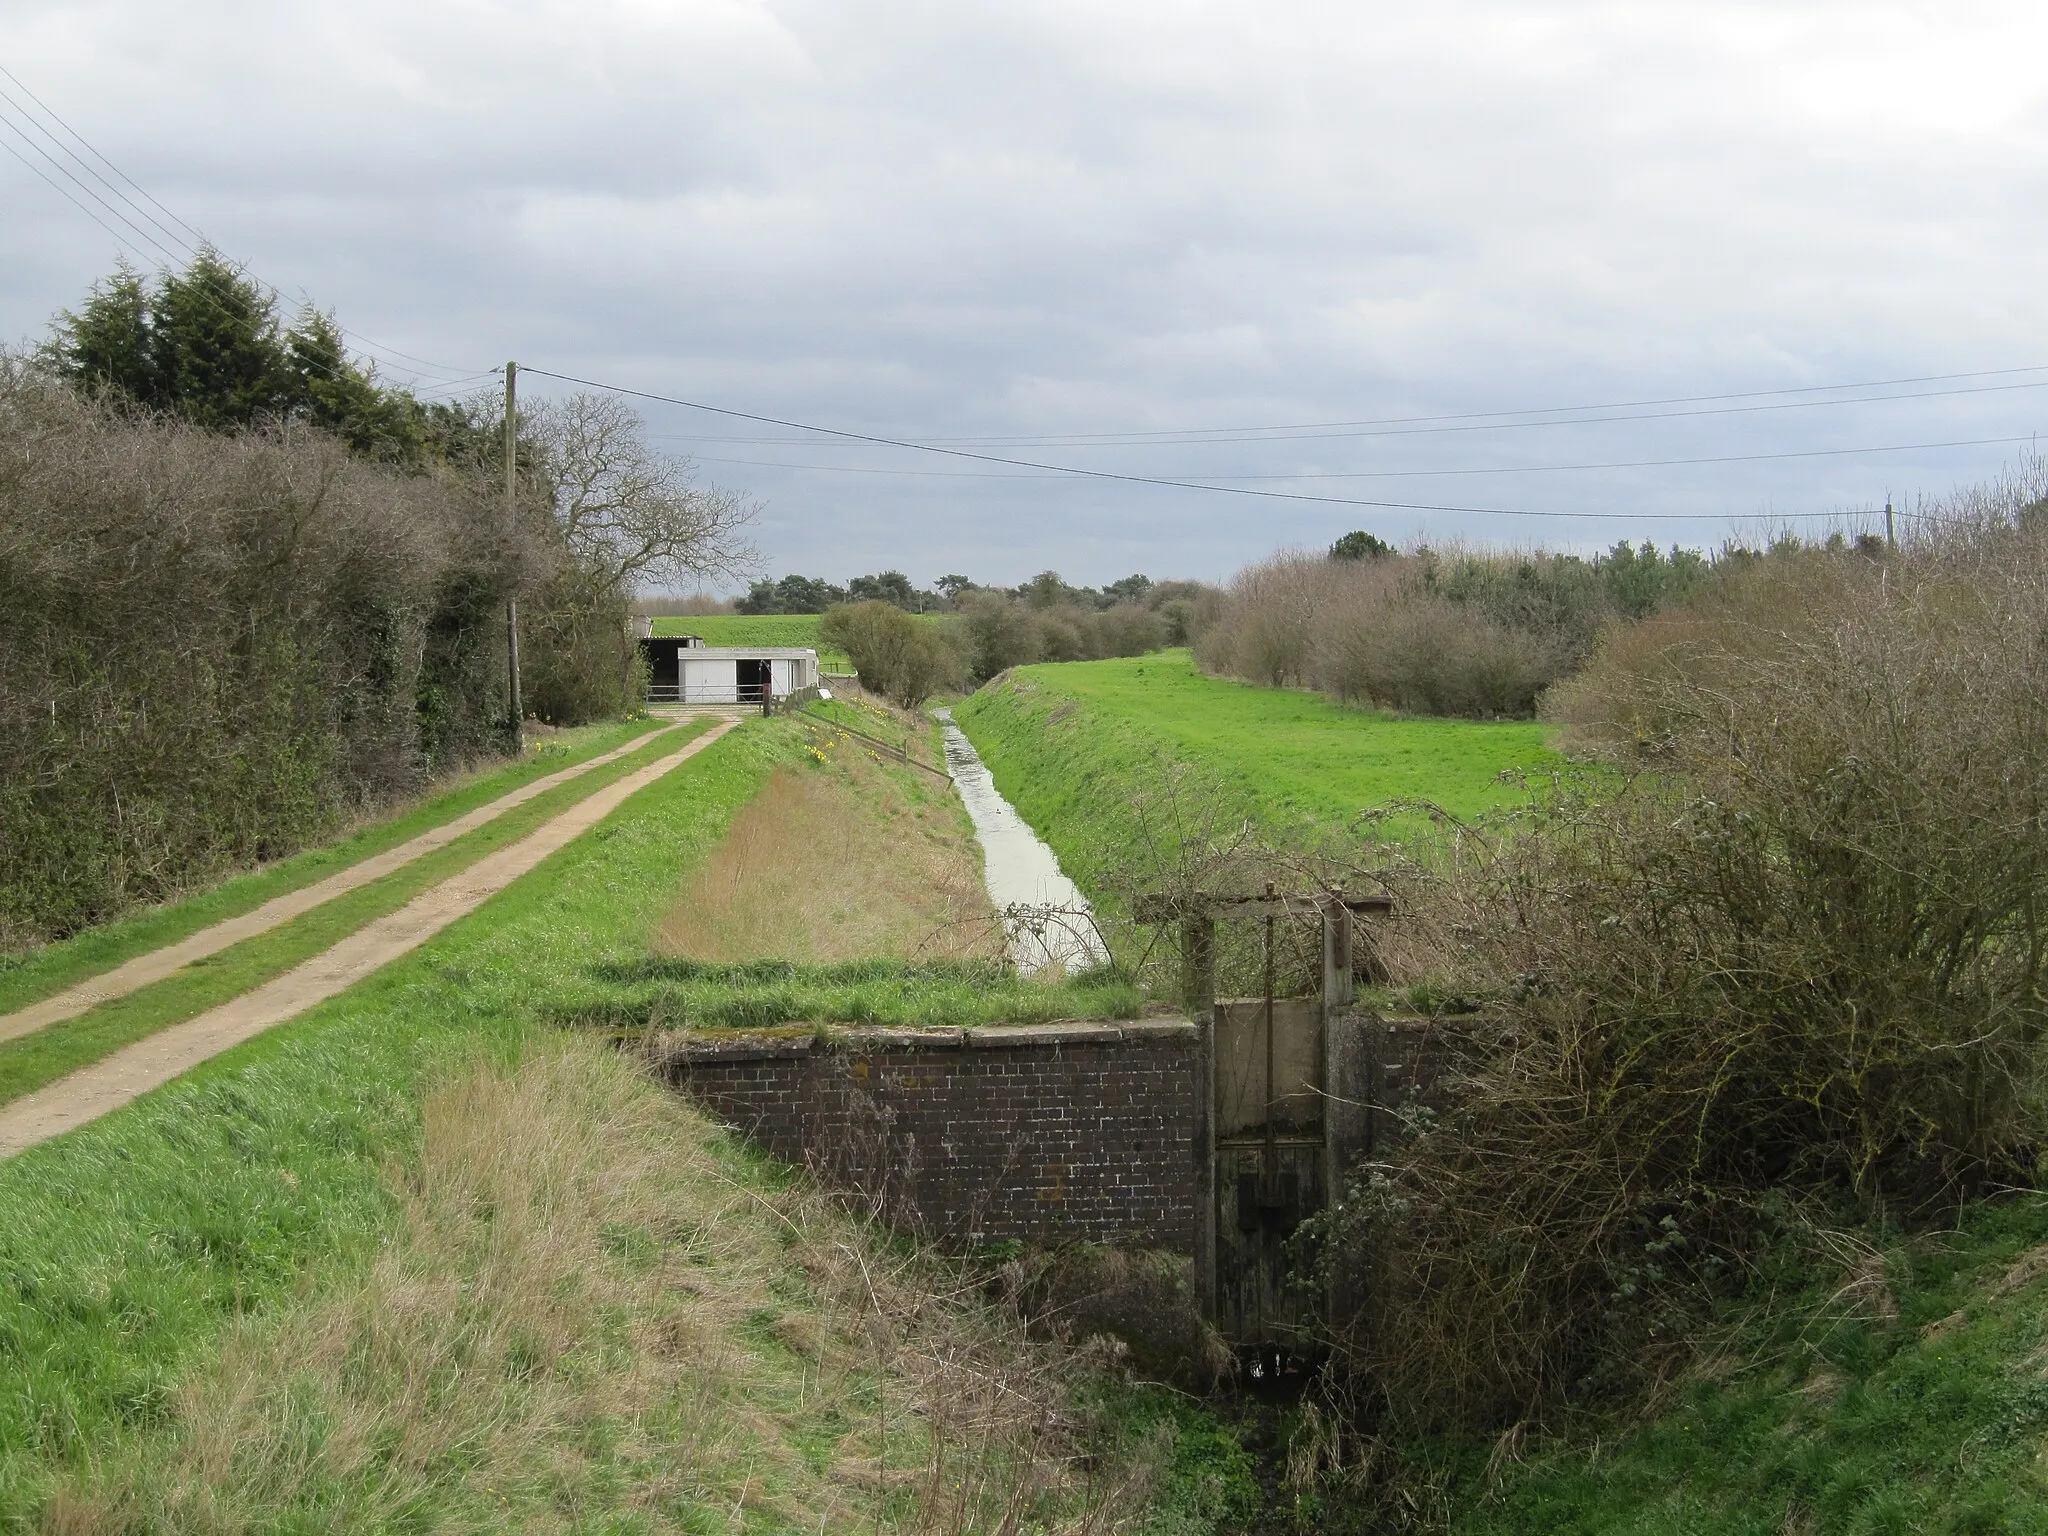 Photo showing: Guthram Gowt inflow drain at foot of south forty foot
On the other side of the road from the engine peninsula, this drain is conducting water from the very southmost part of Bourne North Fen towards the south forty foot. after passing over the sluice in the foreground the water passes under the bridge and into the drain in the foreground of geograph 1788314, which drain runs into the southern end of the South Forty Foot drain
In the distance can be seen the embankment of the raised River Glen, whose waters are around 3m above the water in this drain, and around 3.6m above the waters below the sluice in the south forty foot.

It is probable that the proposed lock that will allow boats to pass from the south forty foot to the Glen will be somewhere in this photograph.